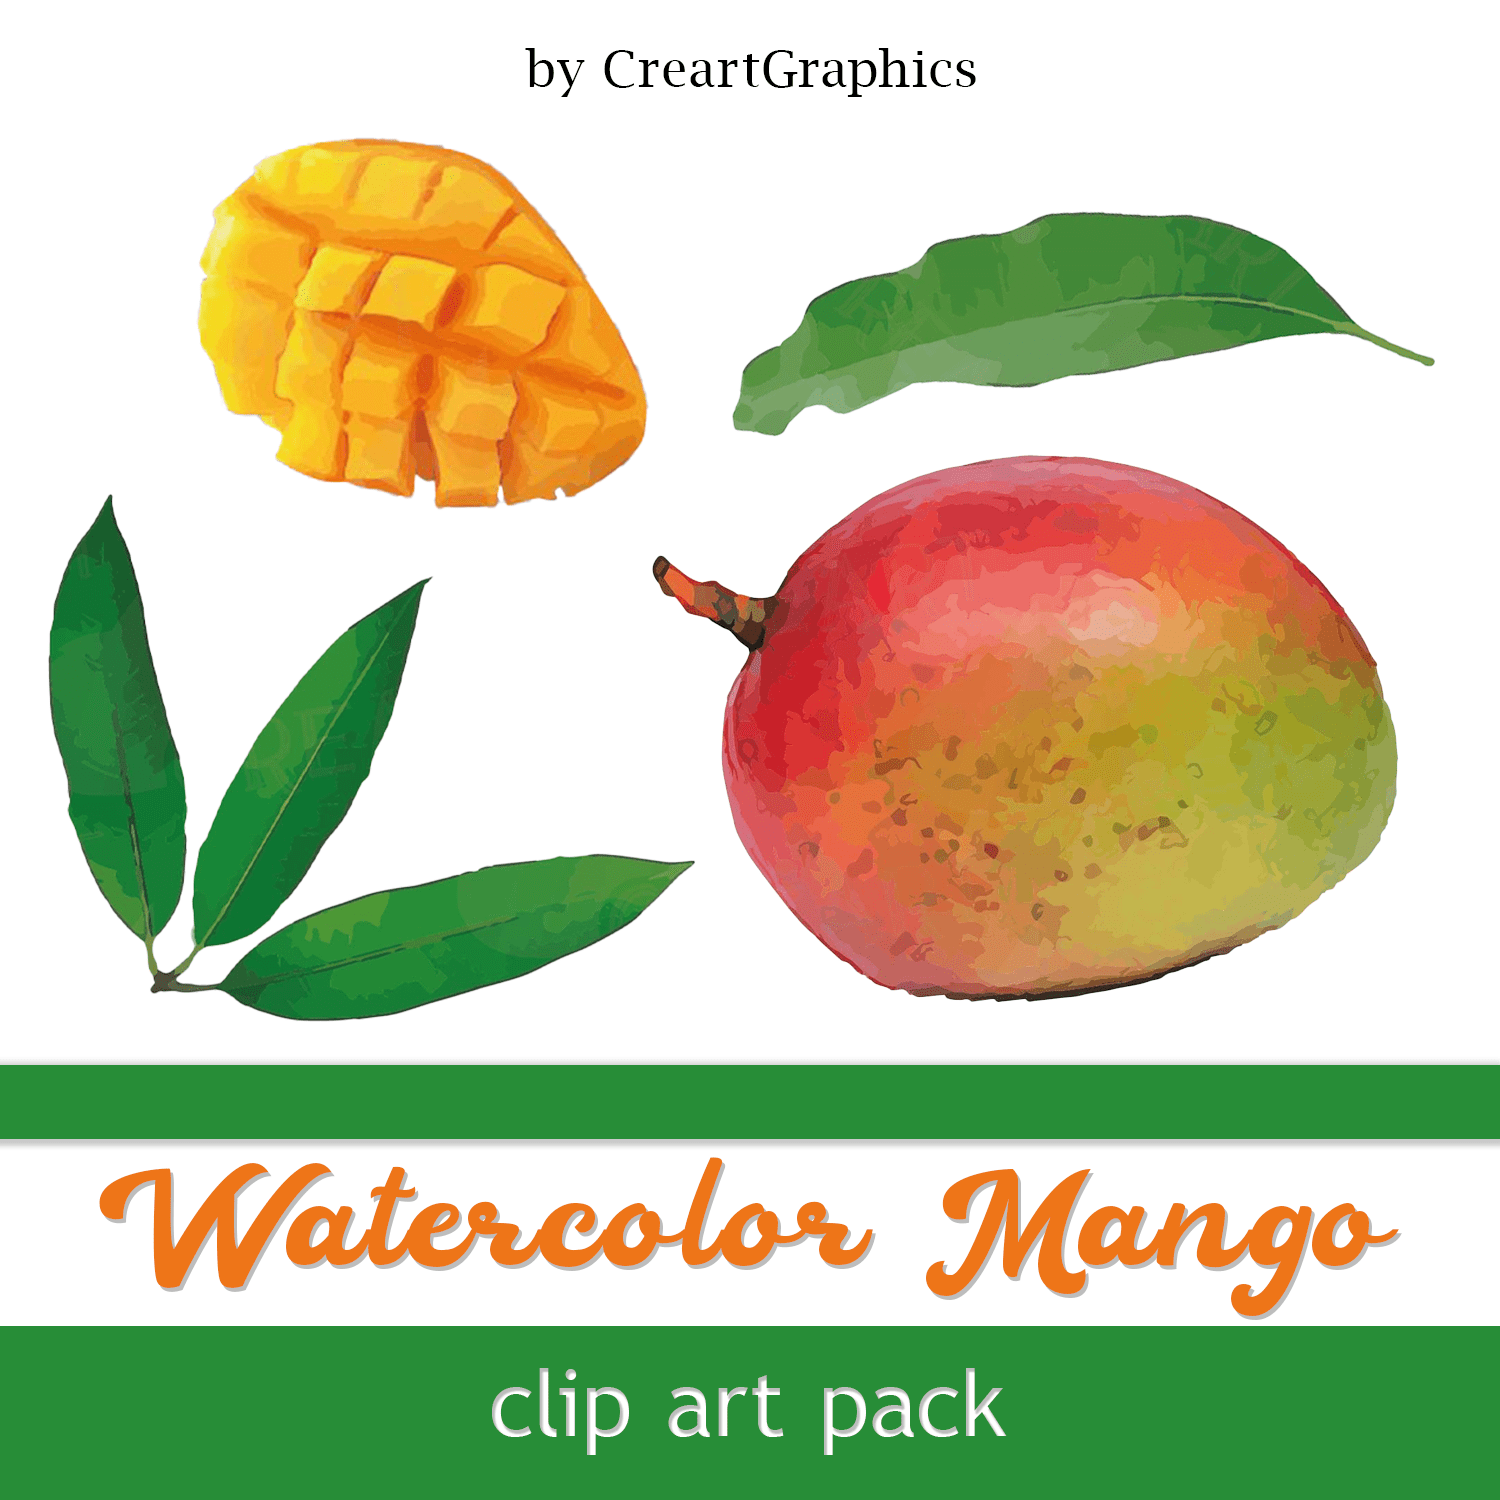 Watercolor mango clip art pack created by CreartGraphics.